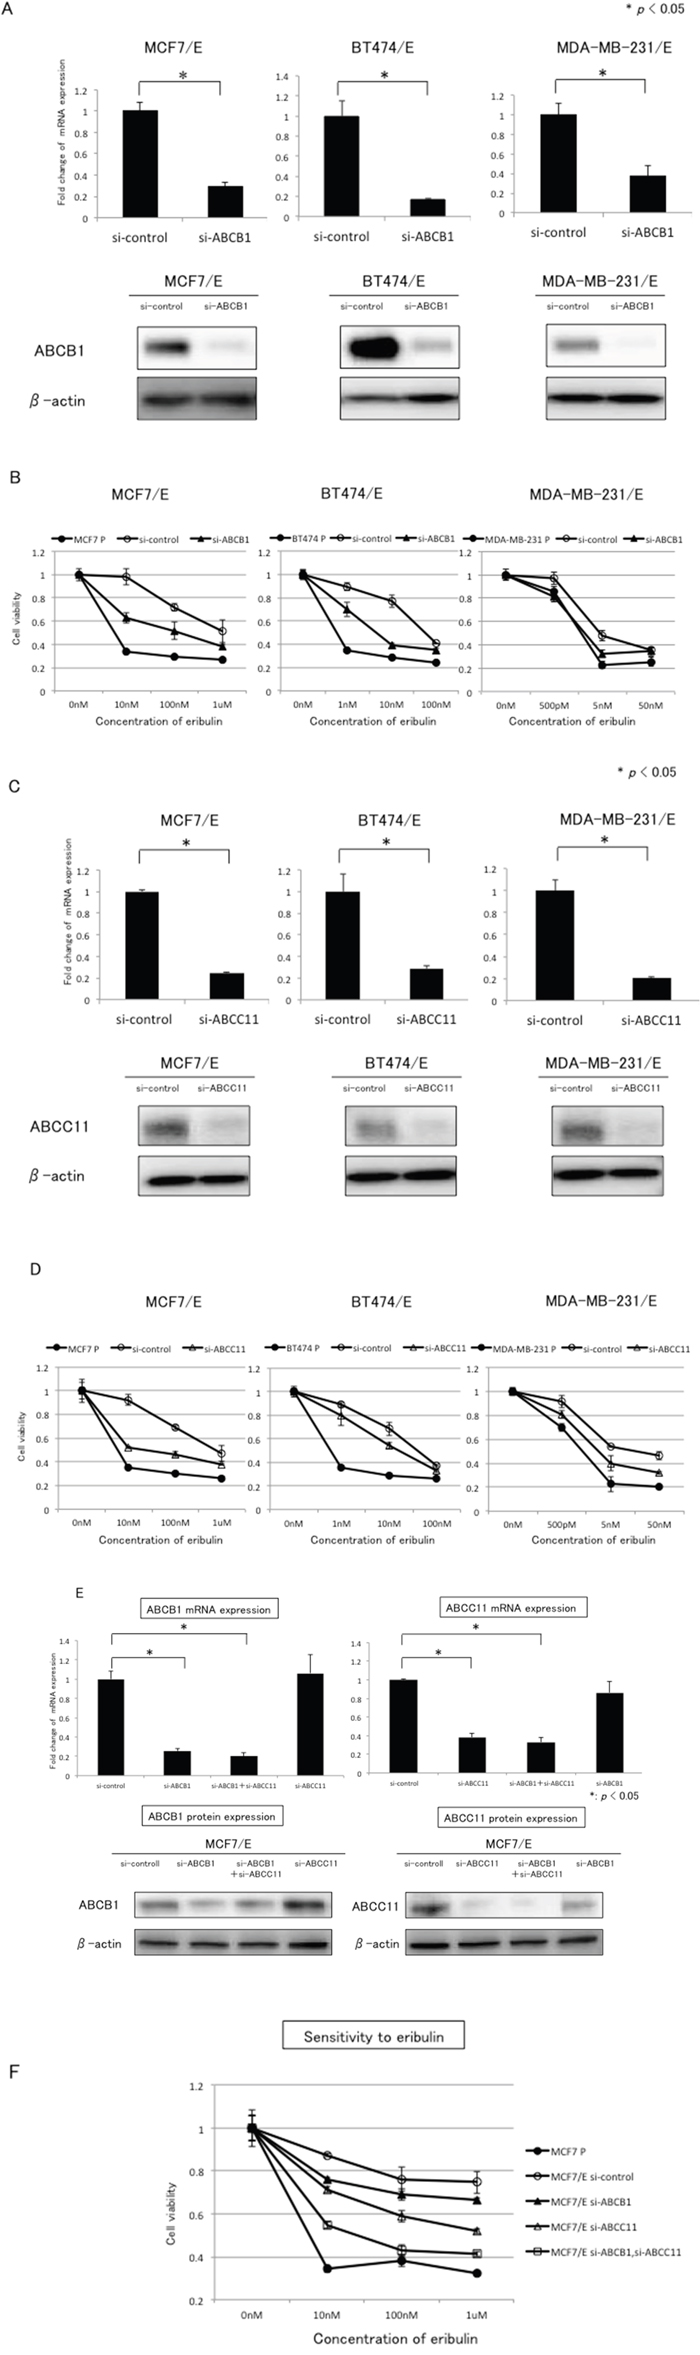 Effects of ABCB1 or ABCC11 knockdown in eribulin-resistant breast cancer cells.